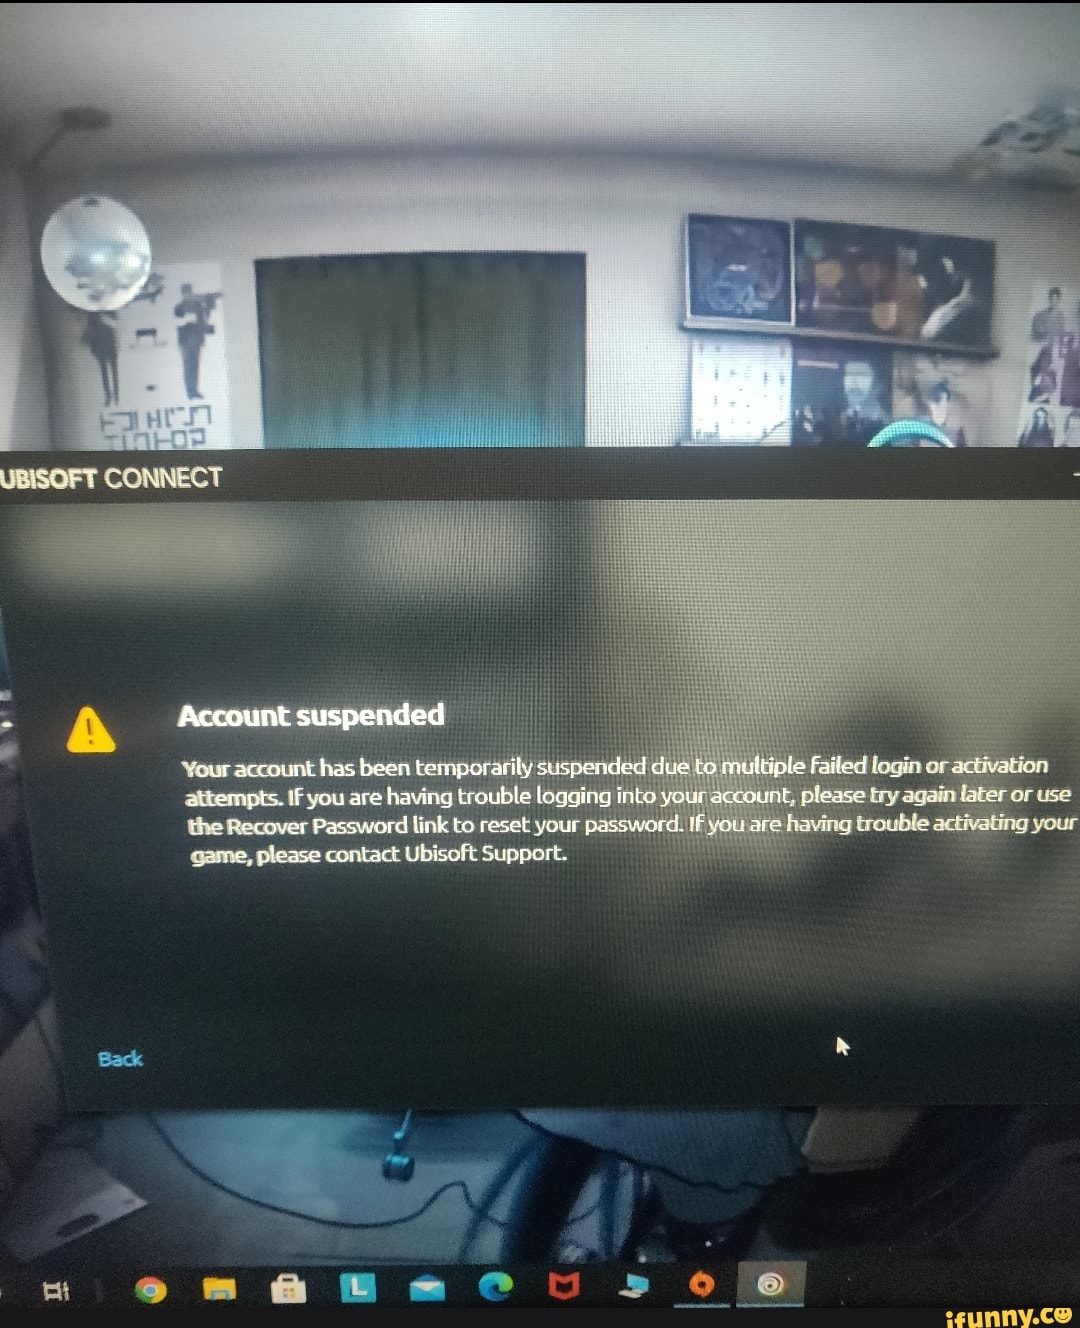 cannot connect to ubisoft servers